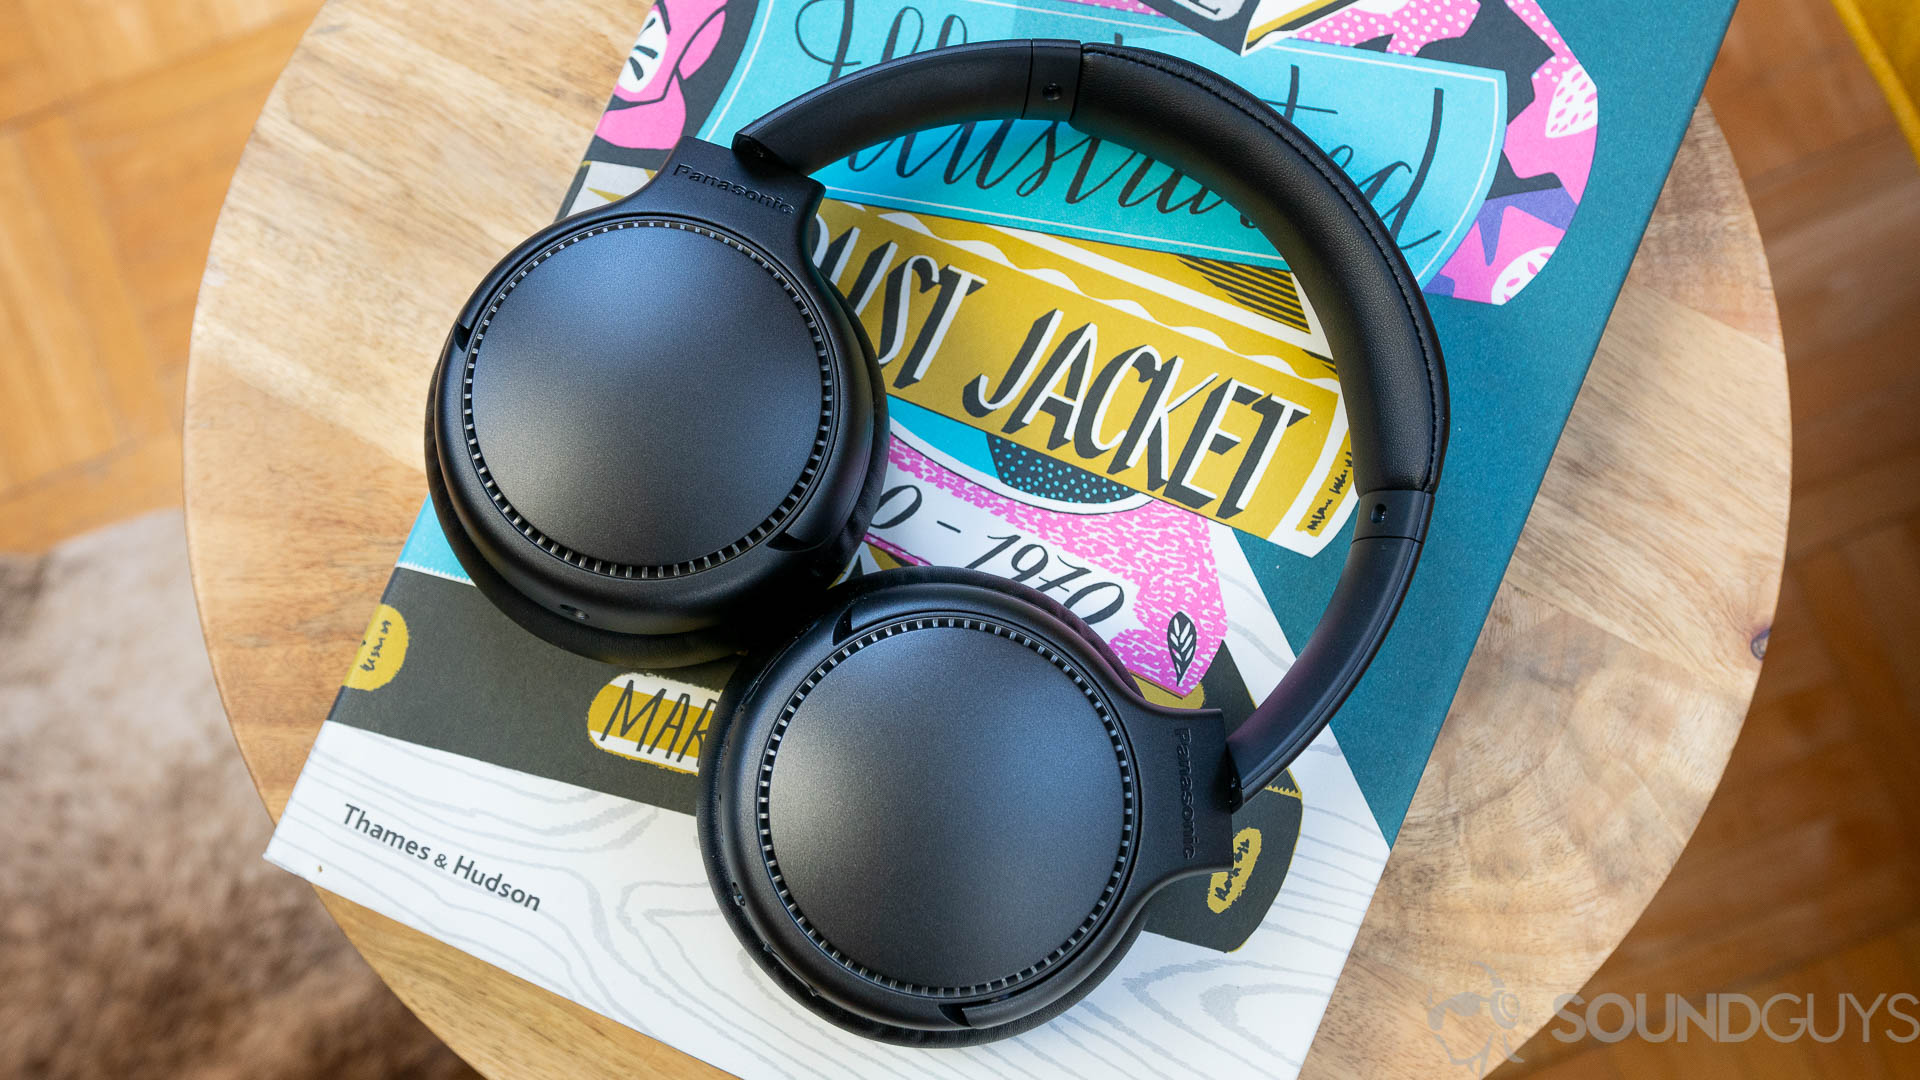 Pictured are the Panasonic RB-M700B headphones on a colorful book cover on wooden table